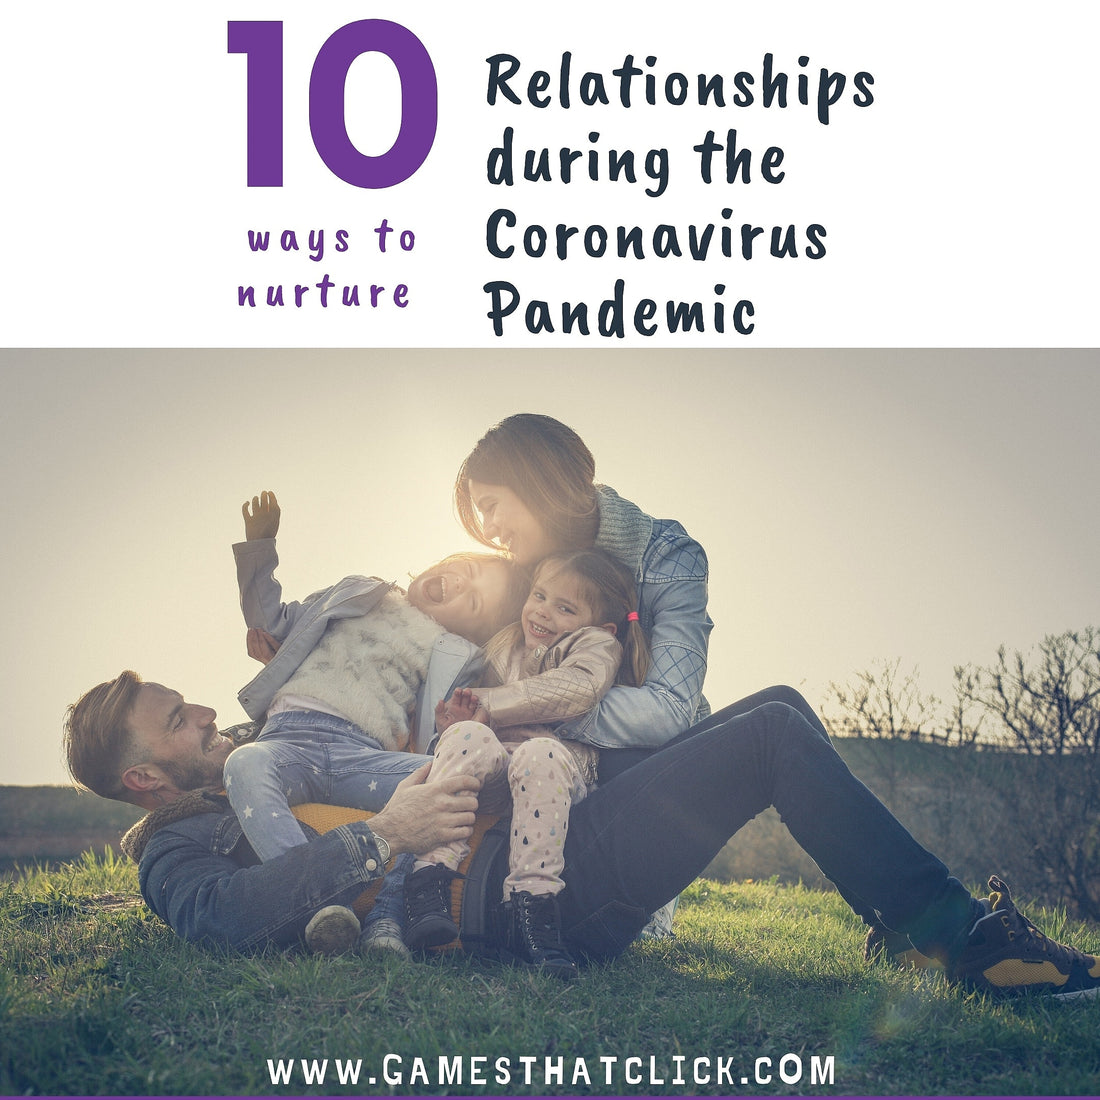 10 tips for connecting during the Coronavirus Pandemic